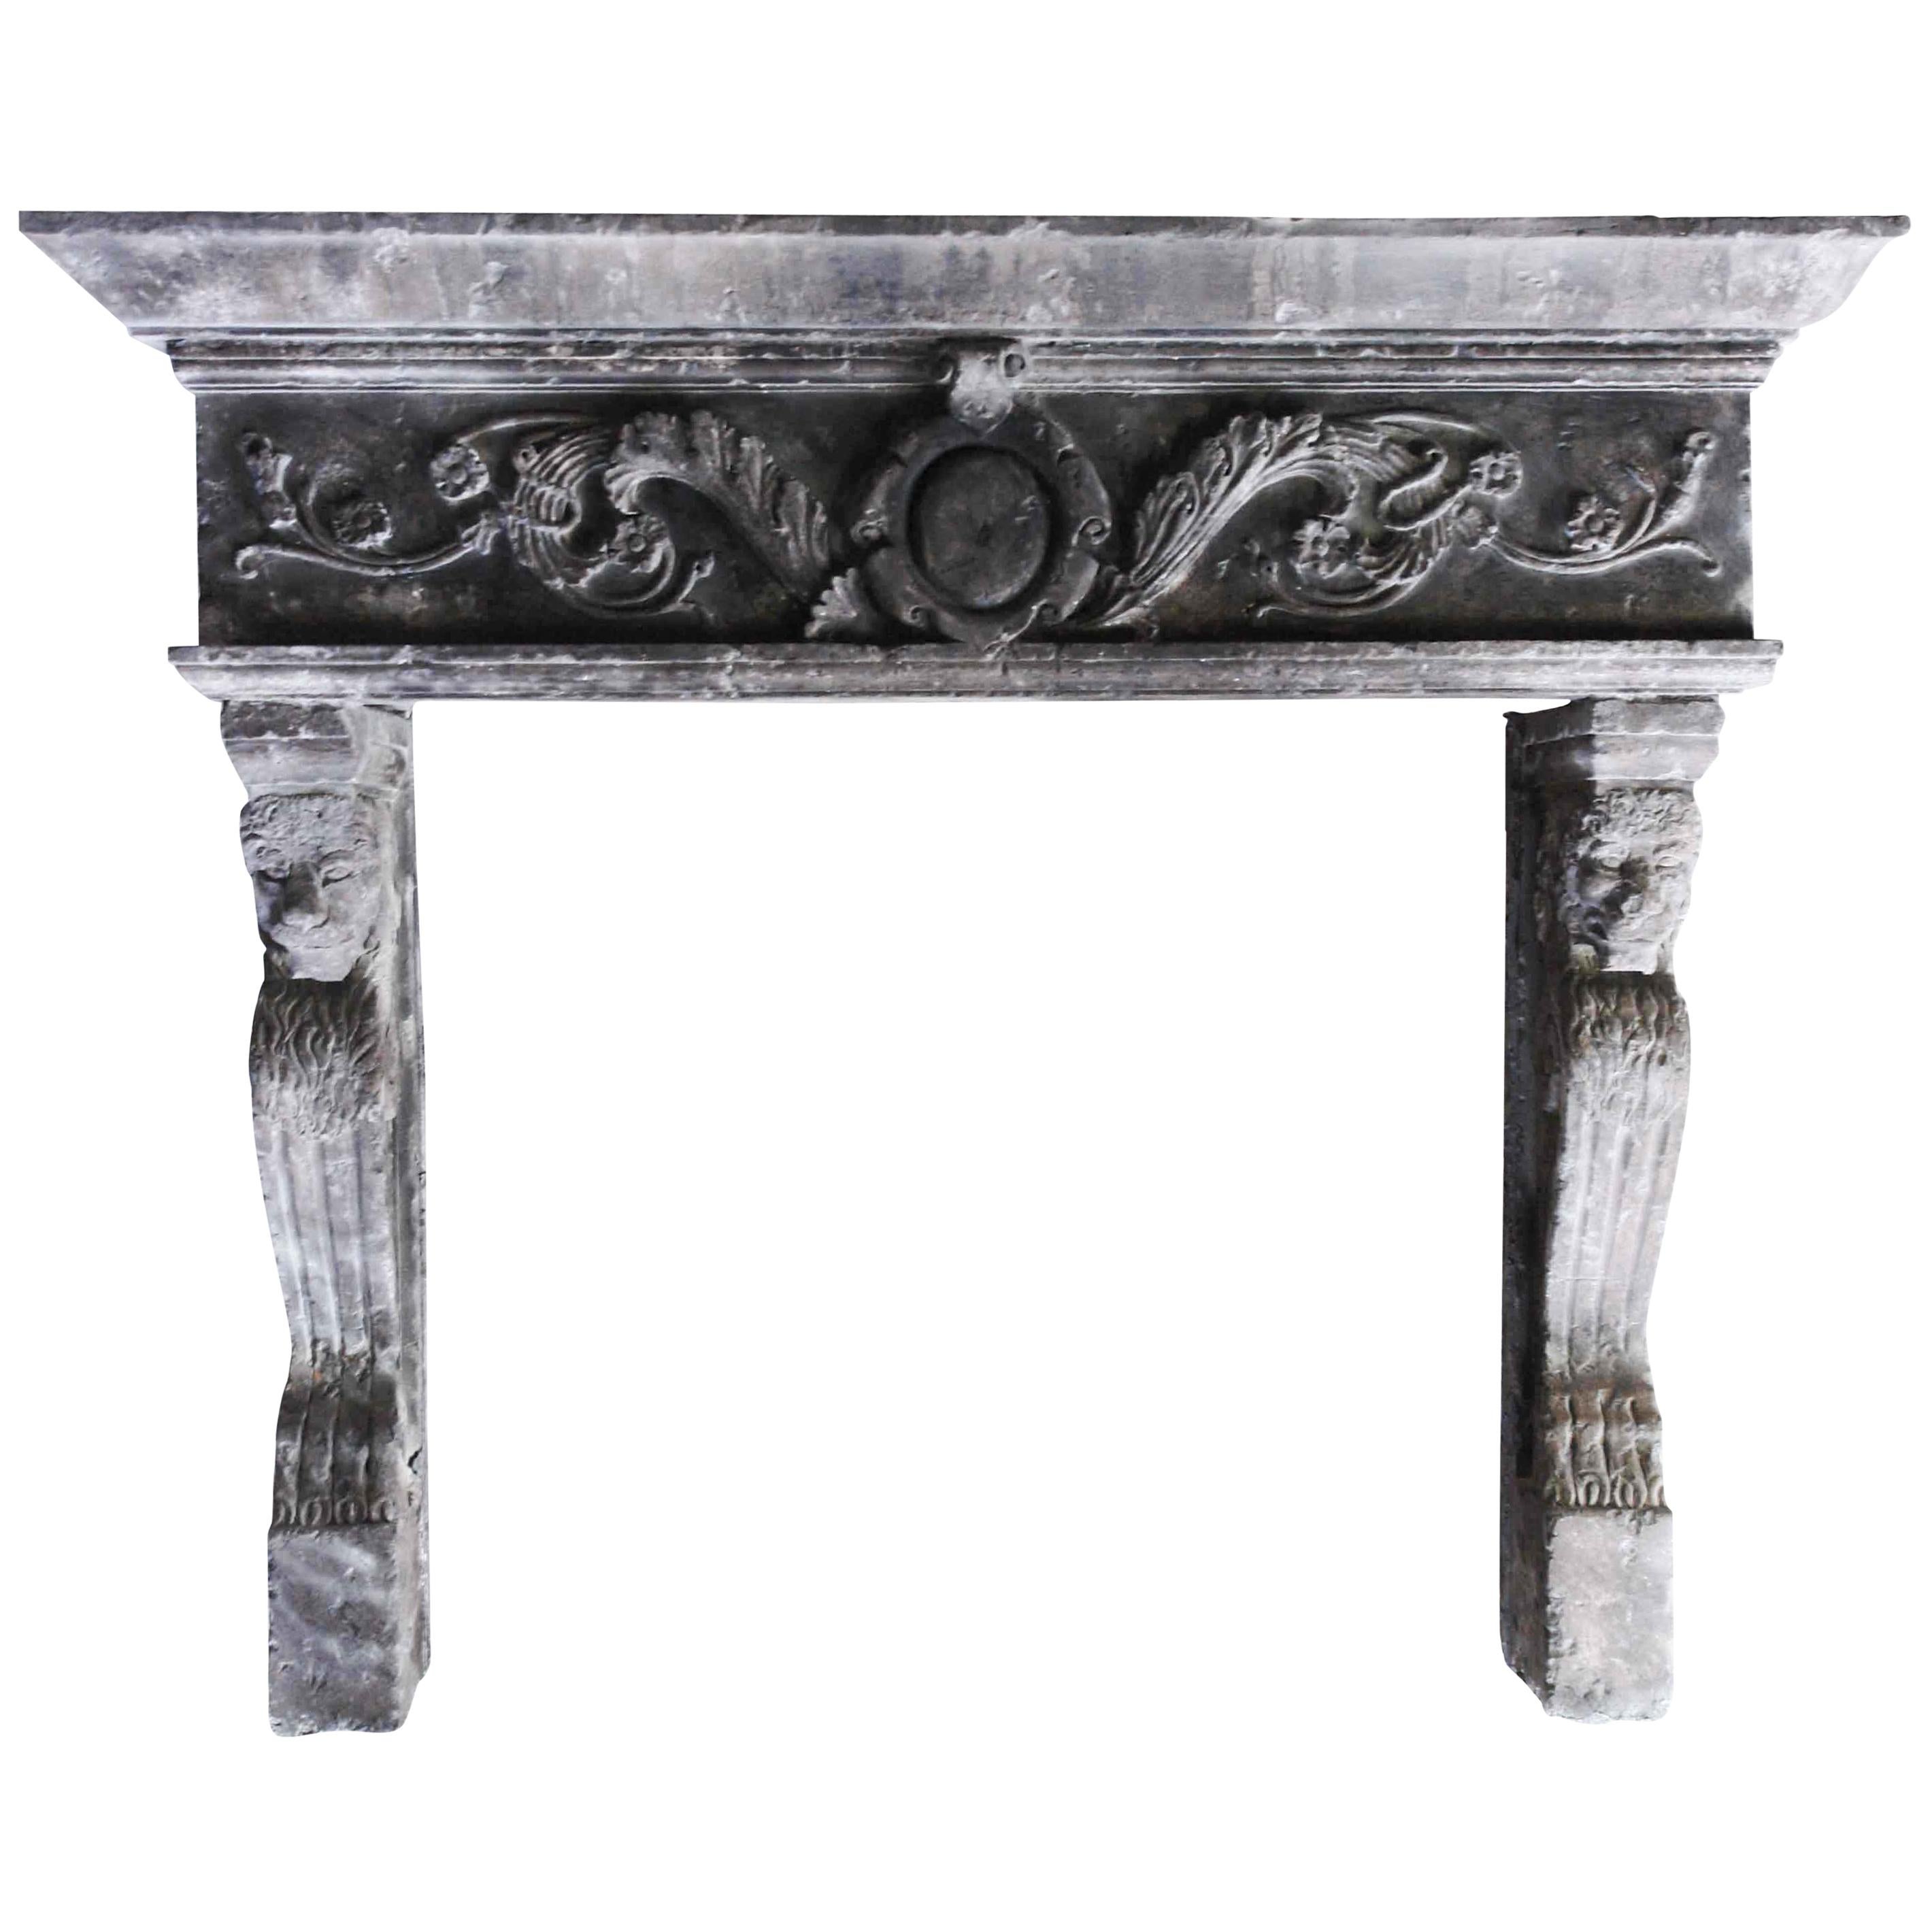 Italian Lions Renaissance Style Fireplace Hand-Carved Limestone Antique Finish For Sale